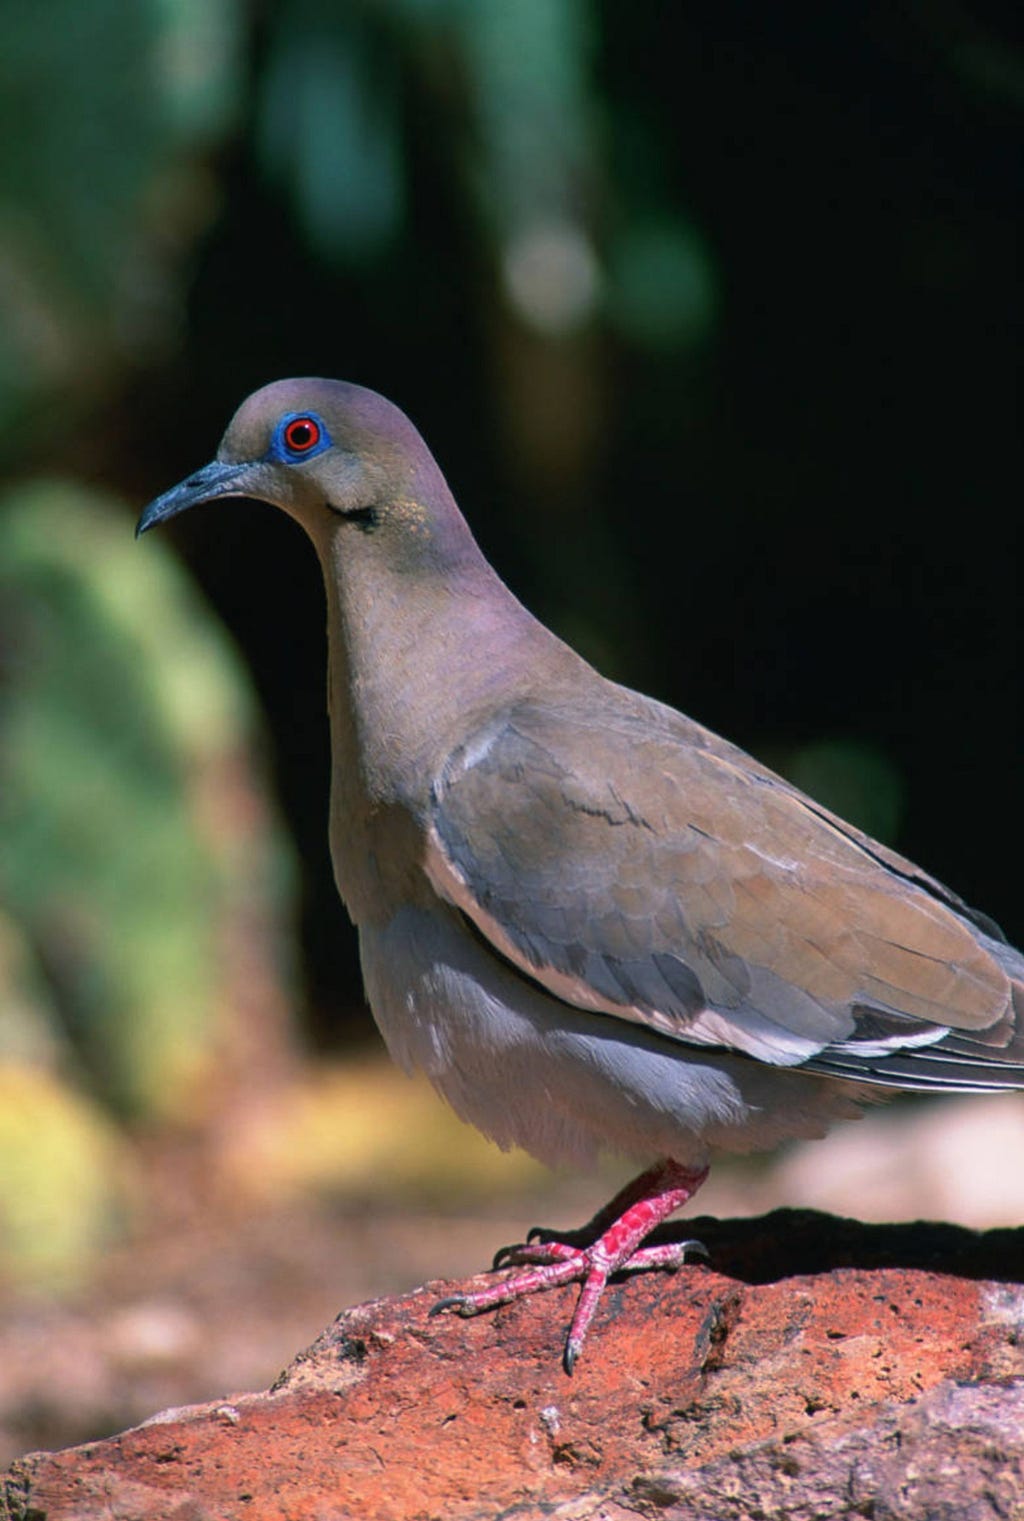 White-winged dove on a rock.